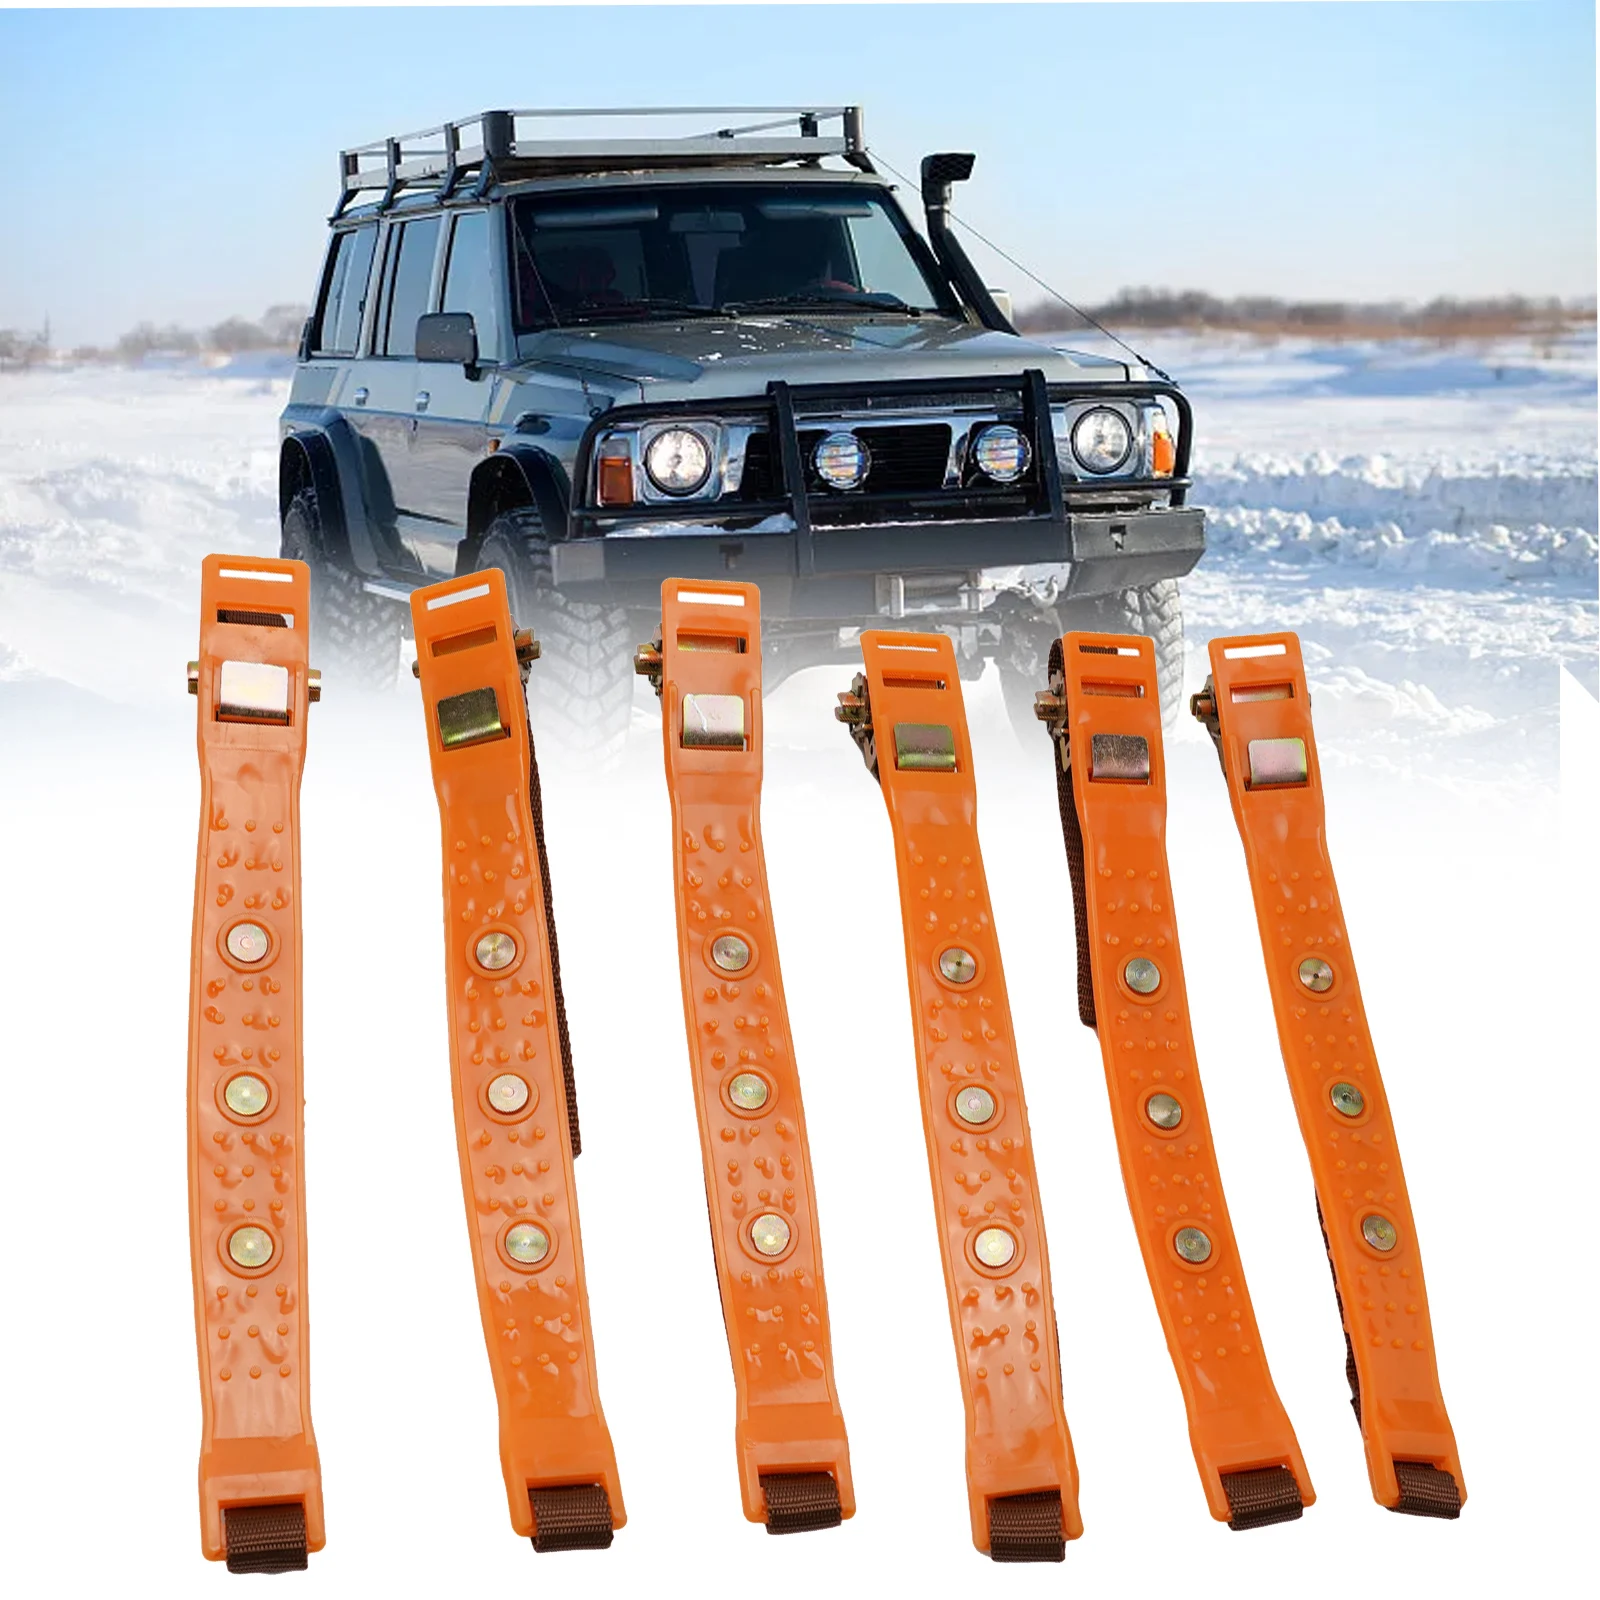 

Premium Snow Mud Tire Chains Constructed with TPU and Steel Fits Tire Width (165mm 265mm) Suitable for All Seasons